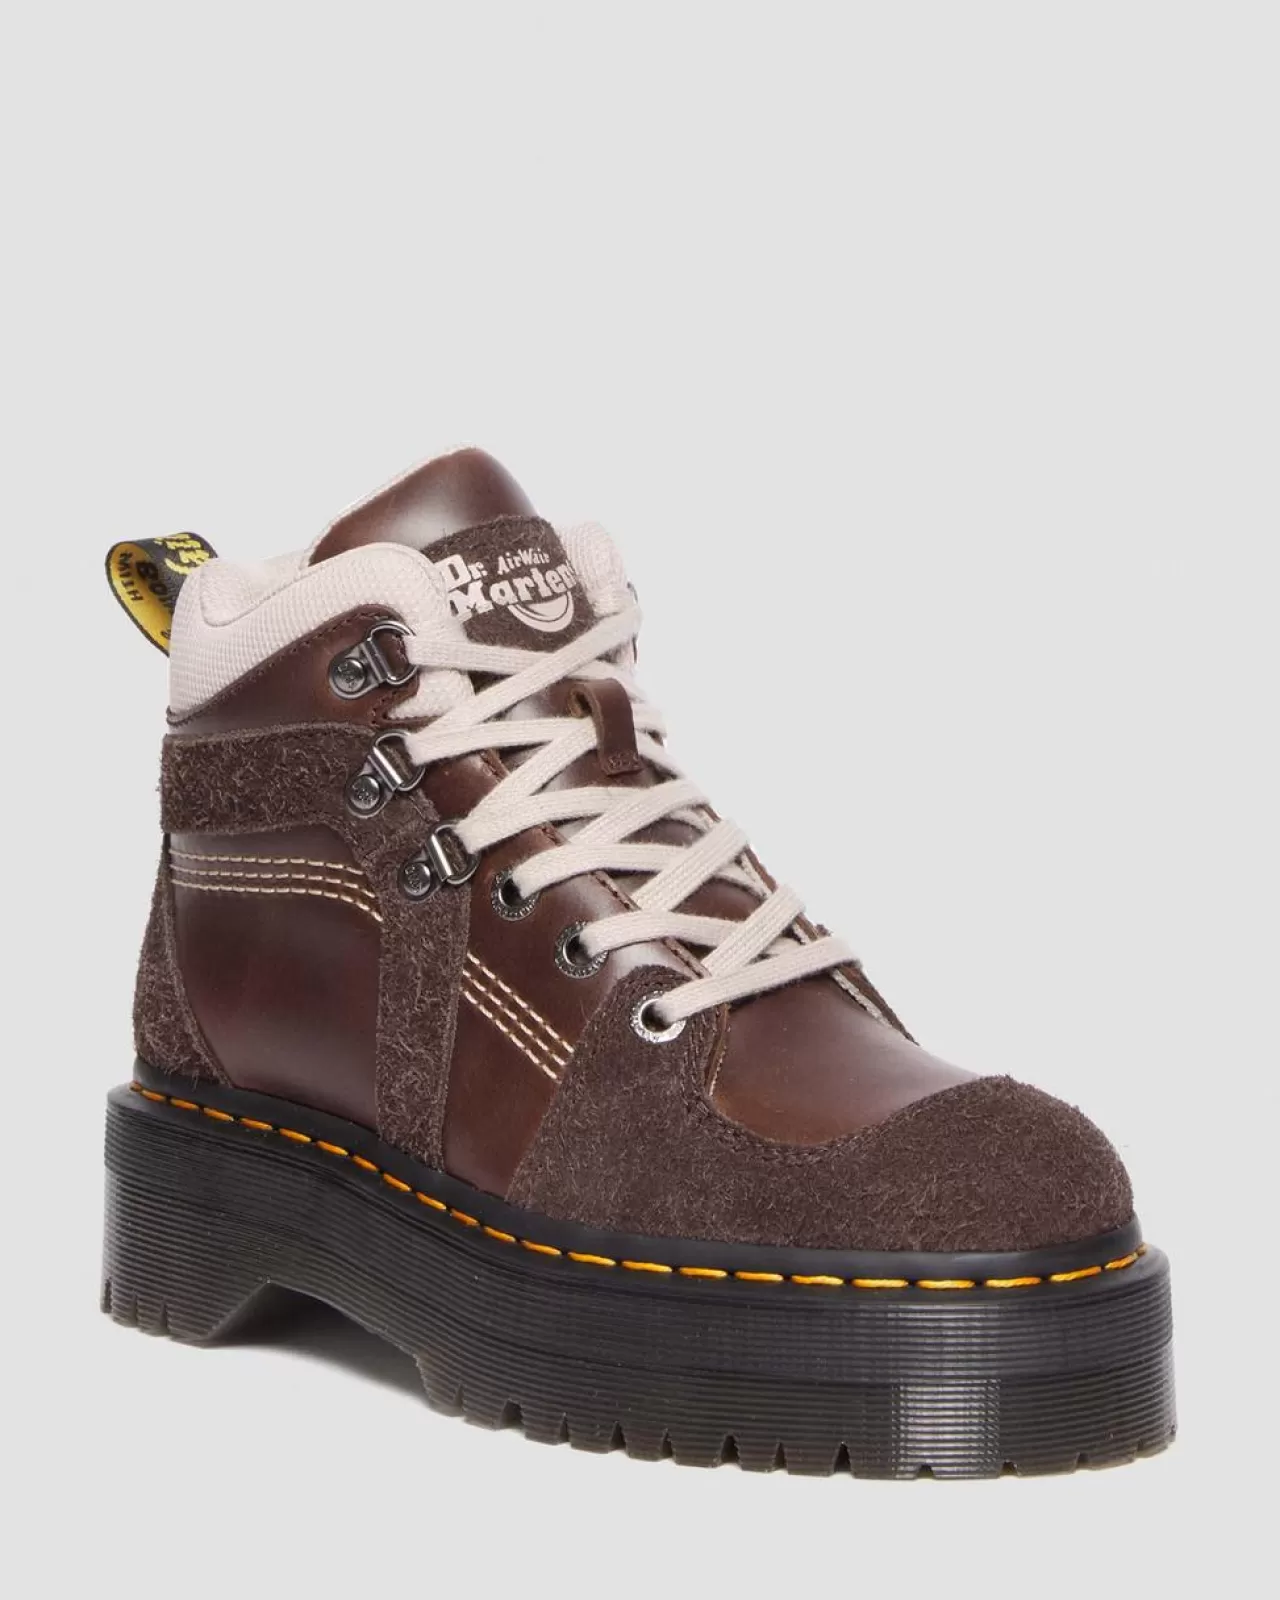 Sale | Ankle Boots^Dr. Martens Zuma Leather & Suede Hiker Style Boots DARK BROWN — Classic Pull Up + Wooly Bully